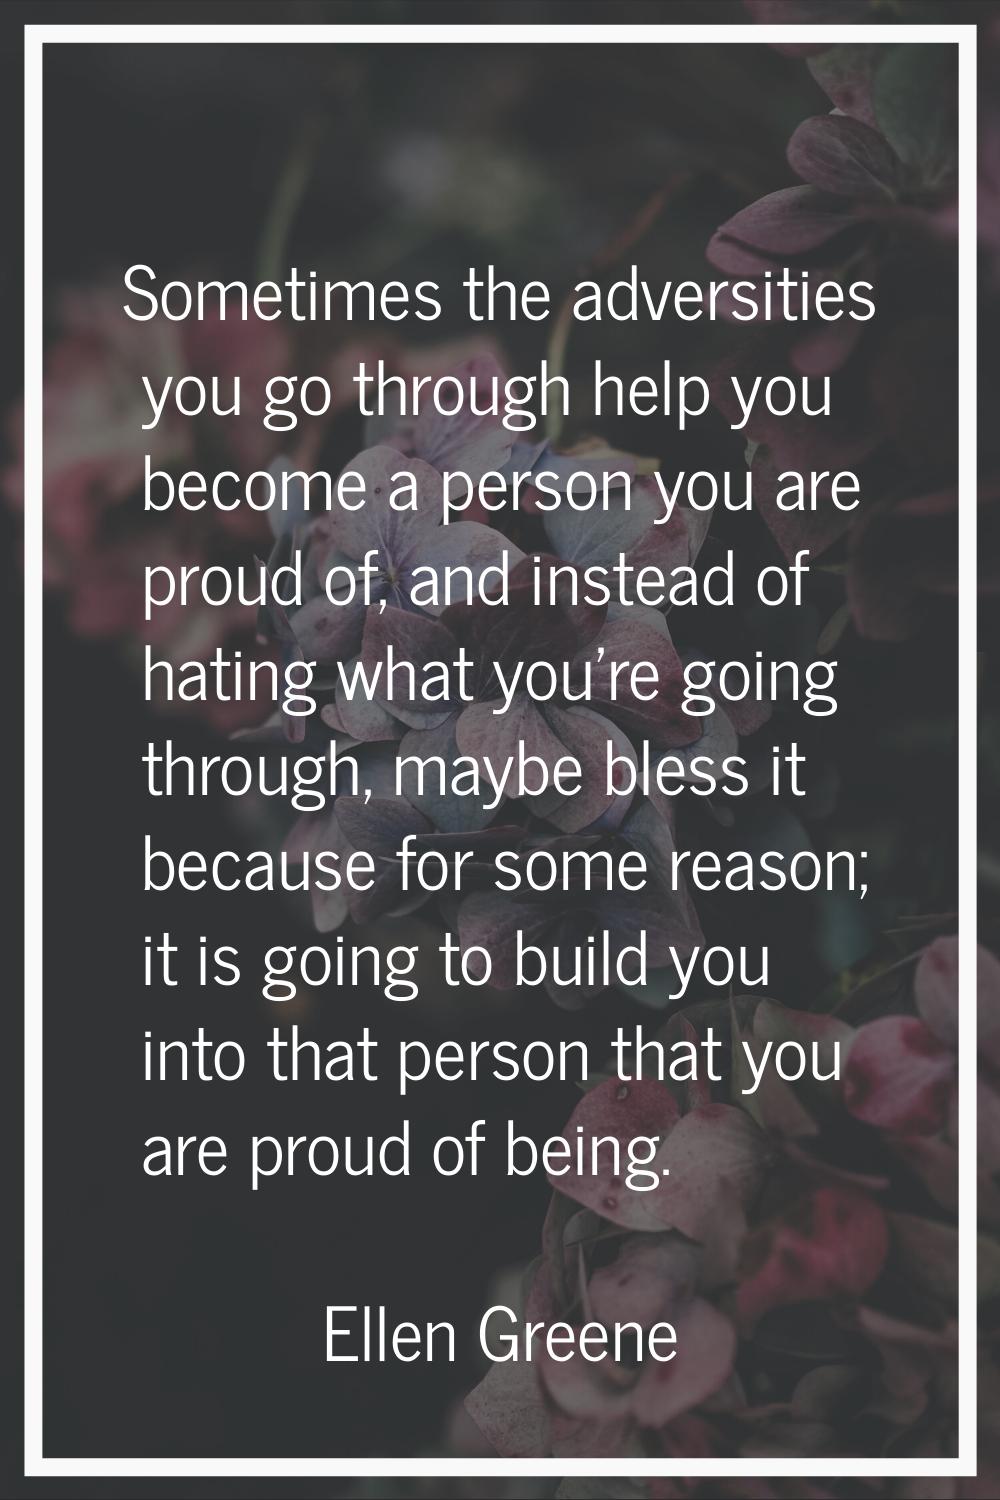 Sometimes the adversities you go through help you become a person you are proud of, and instead of 